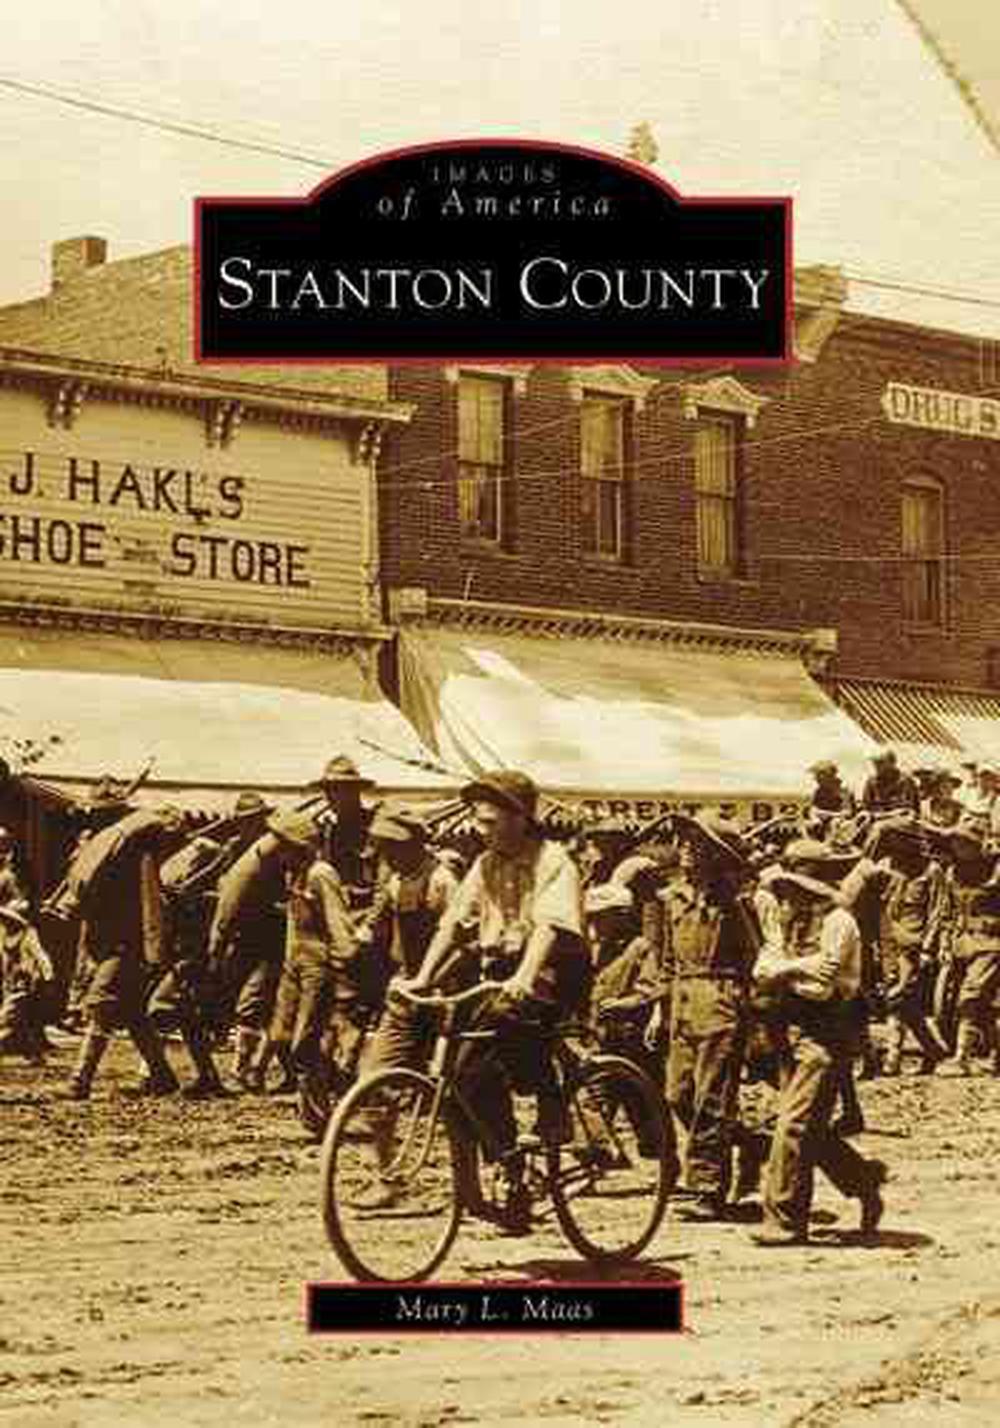 Stanton County by Mary L. Maas (English) Paperback Book Free Shipping